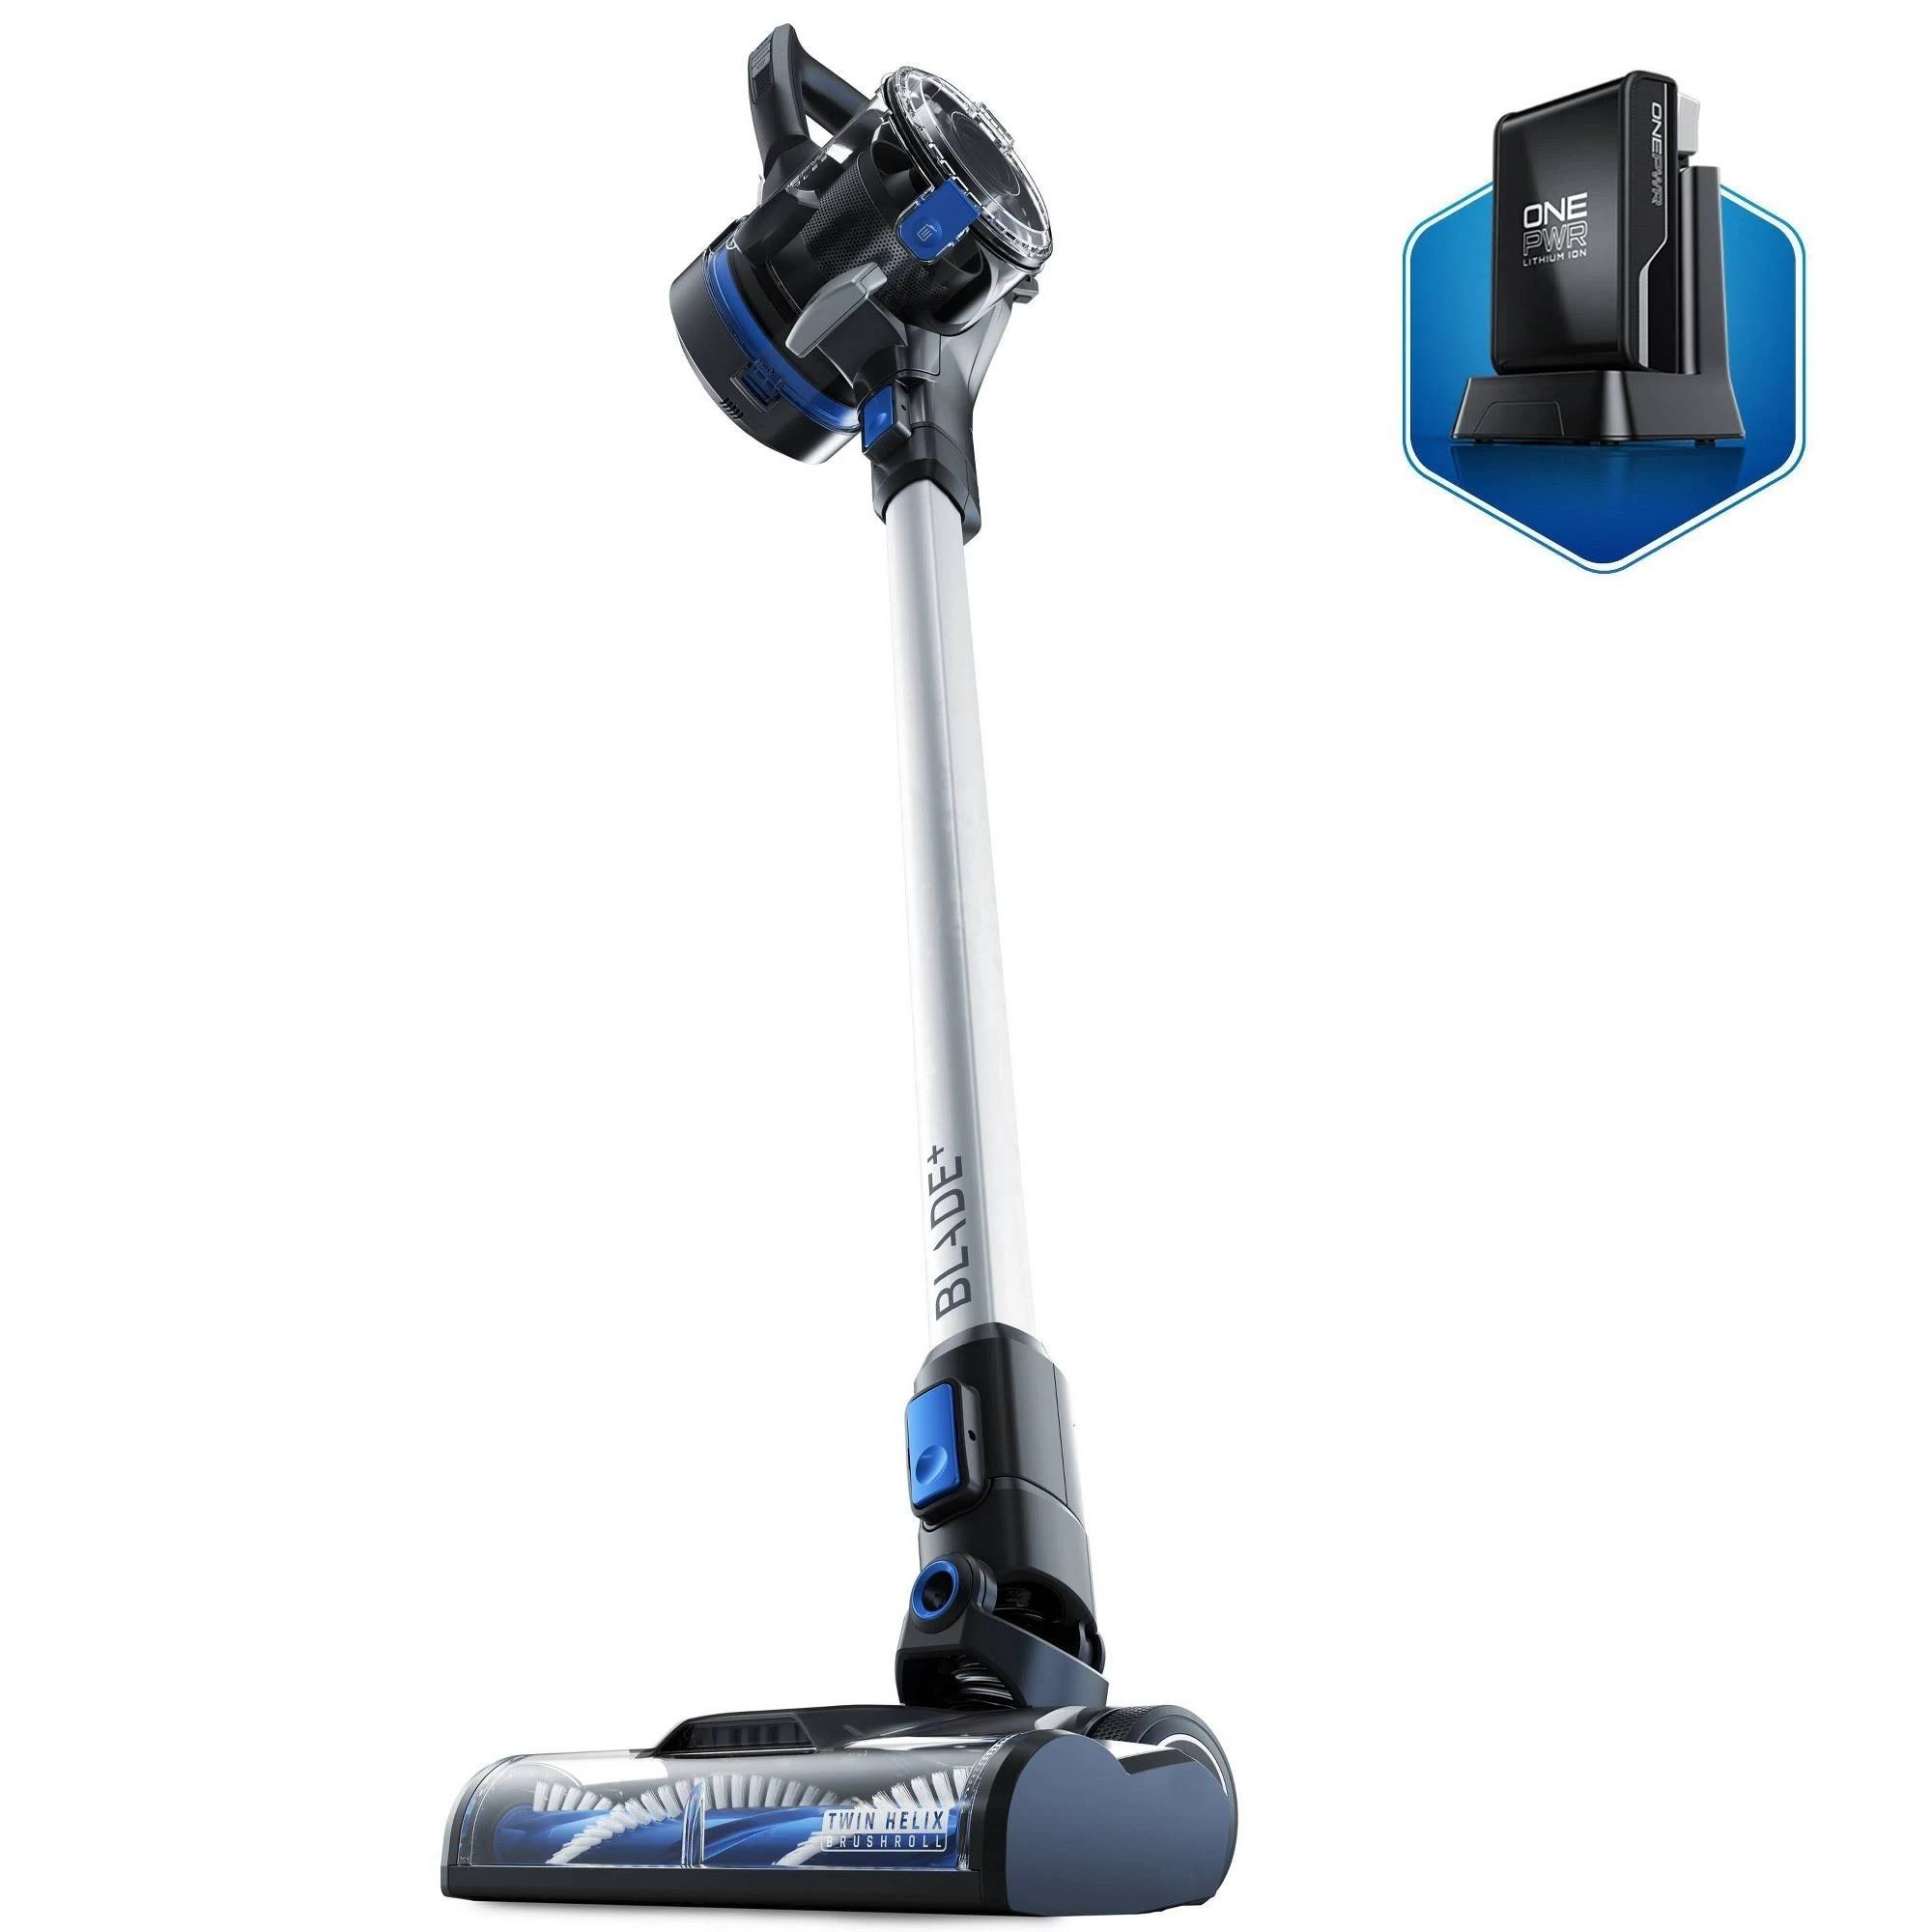 Hoover ONEPWR Blade BH53310 Stick Vacuum, 0.3 L Vacuum, 20 V Battery, Lithium-Ion Battery, 3 Ah